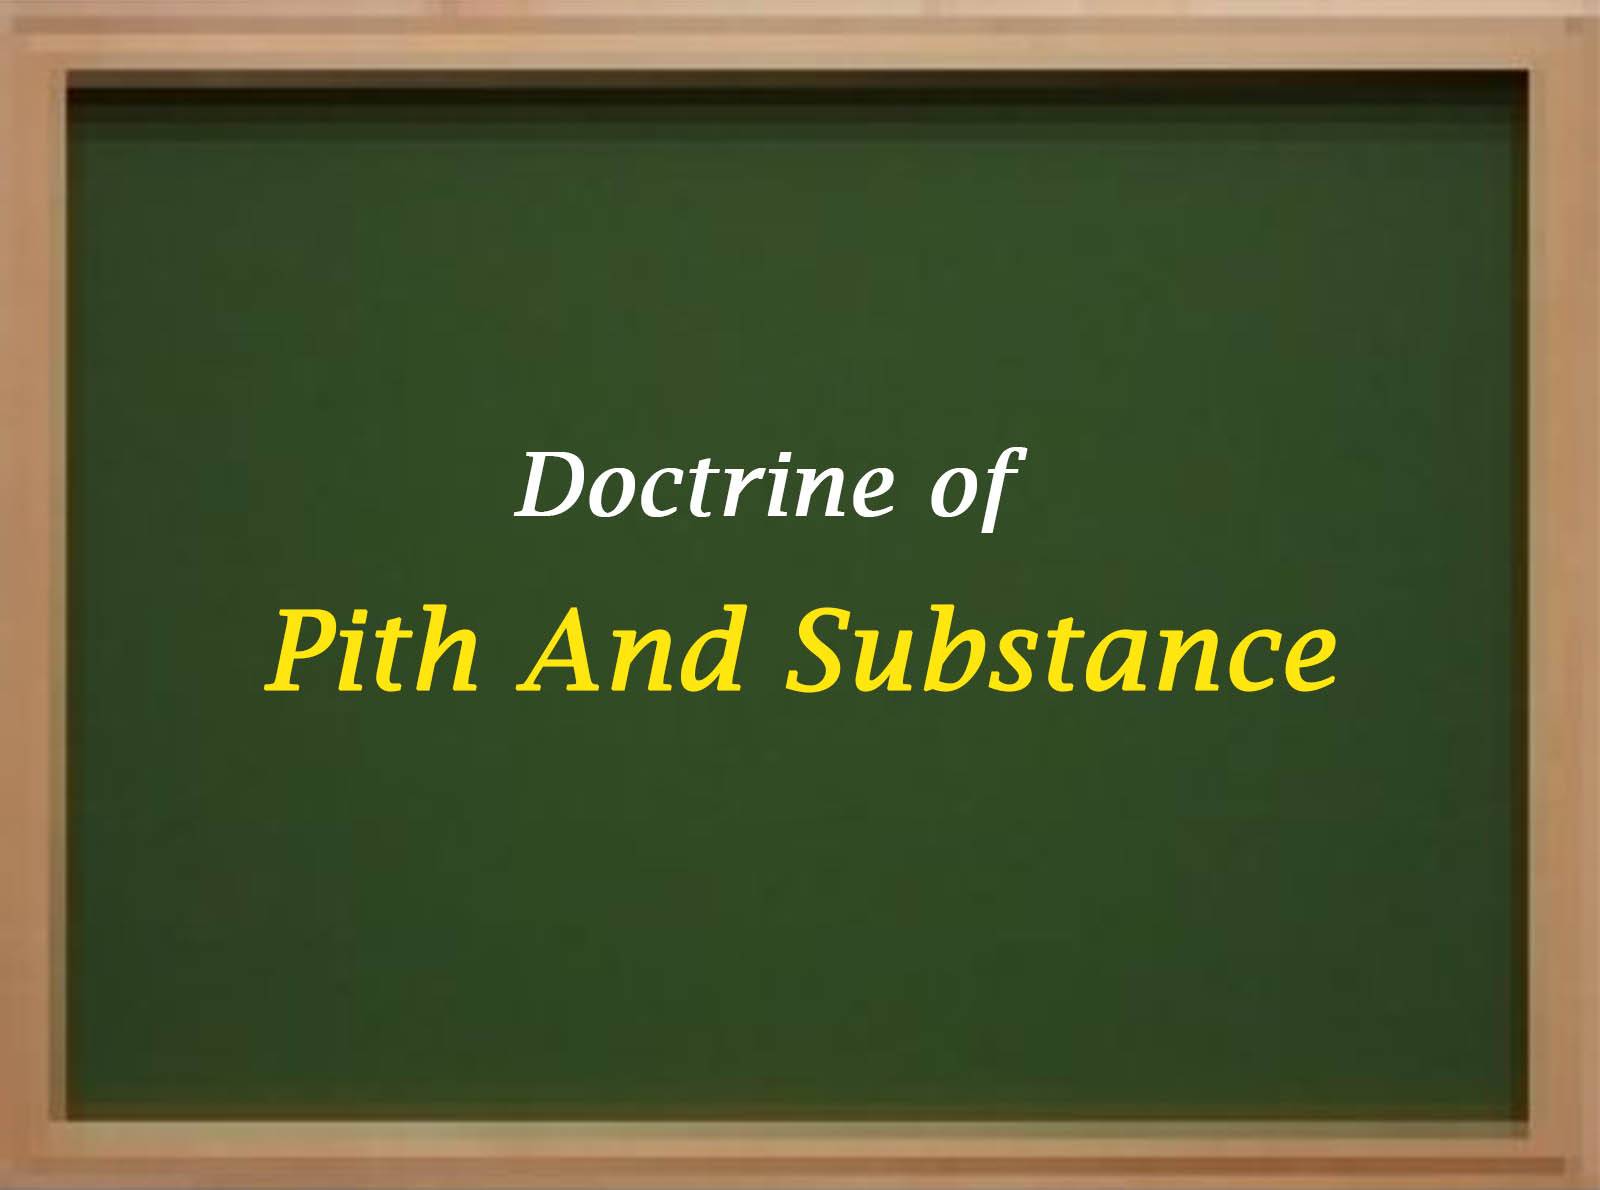 Doctrine of Pith and Substance - Article 246